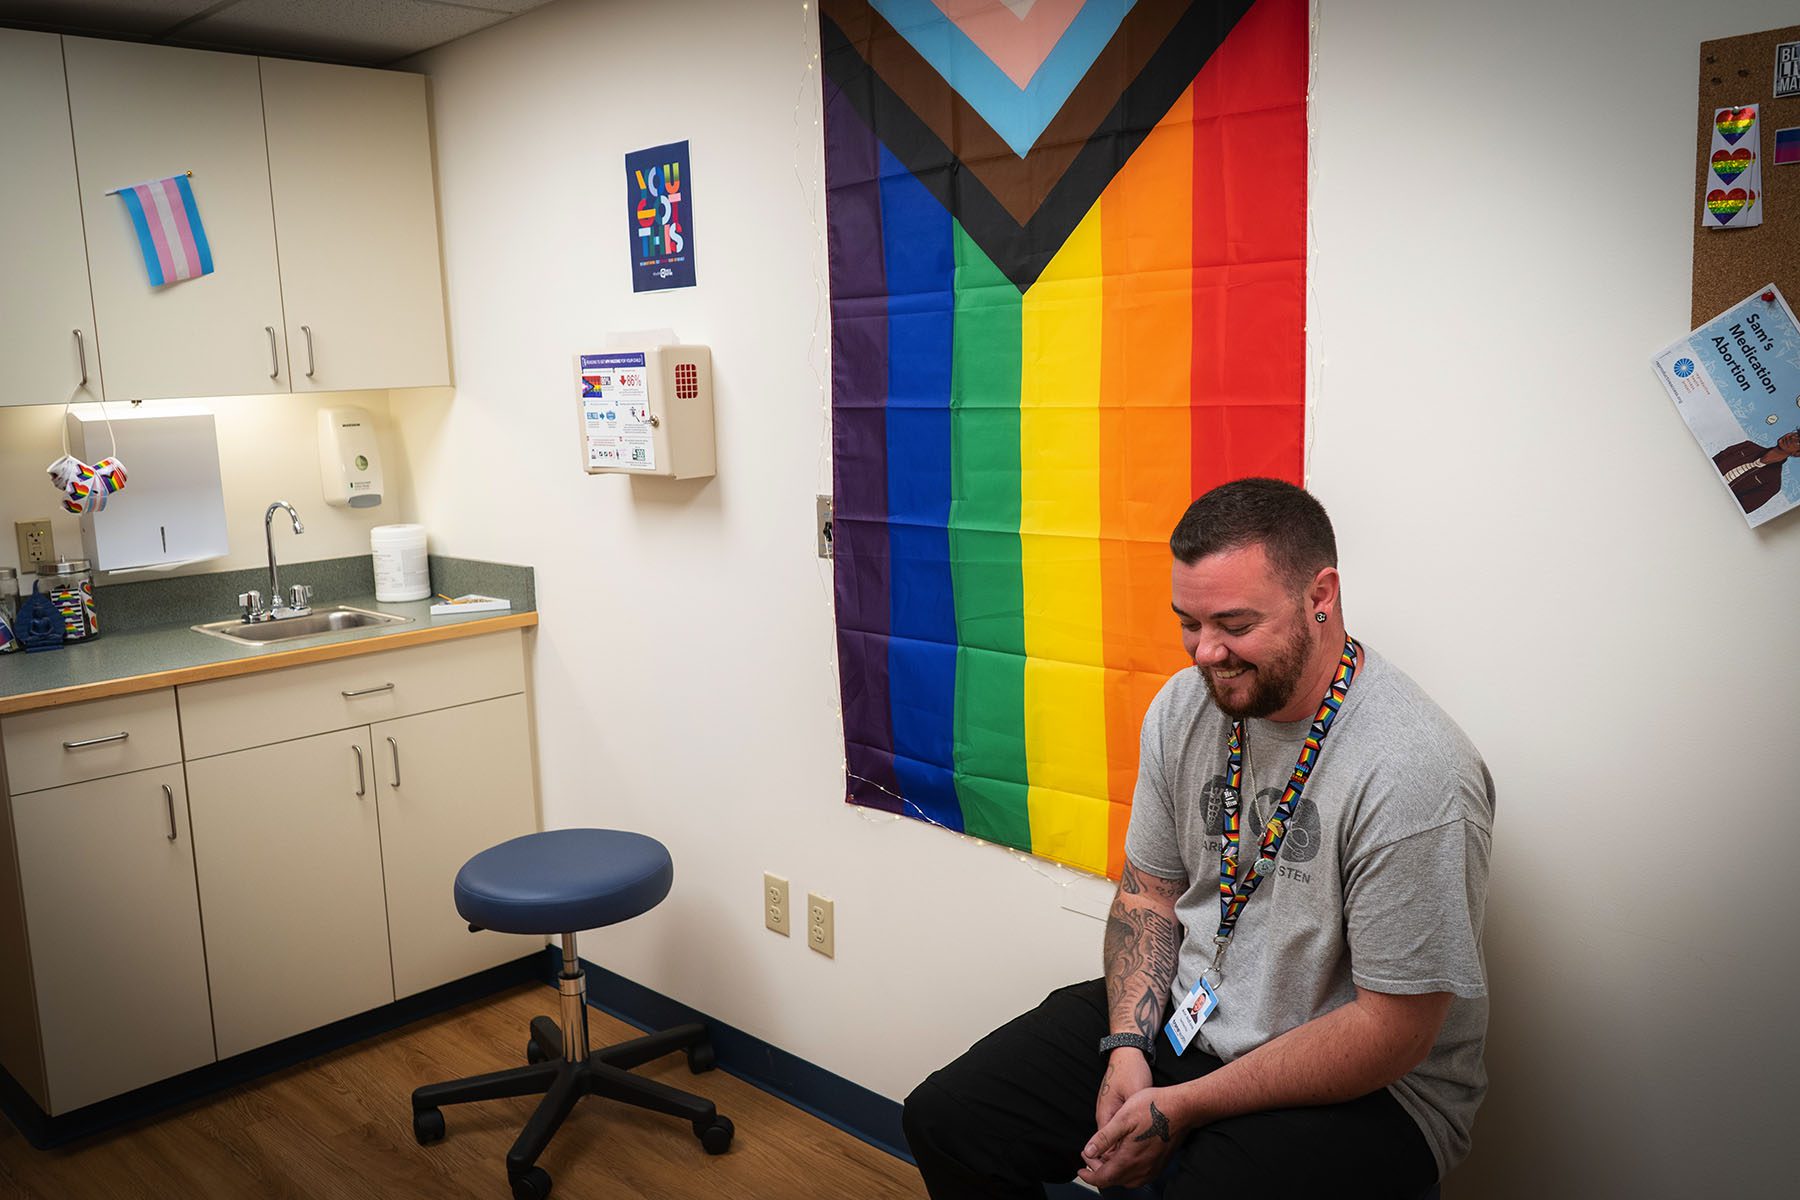 Arin McKona looks down and smiles as he sits on a stool in an examination room draped with a progressive pride flag.